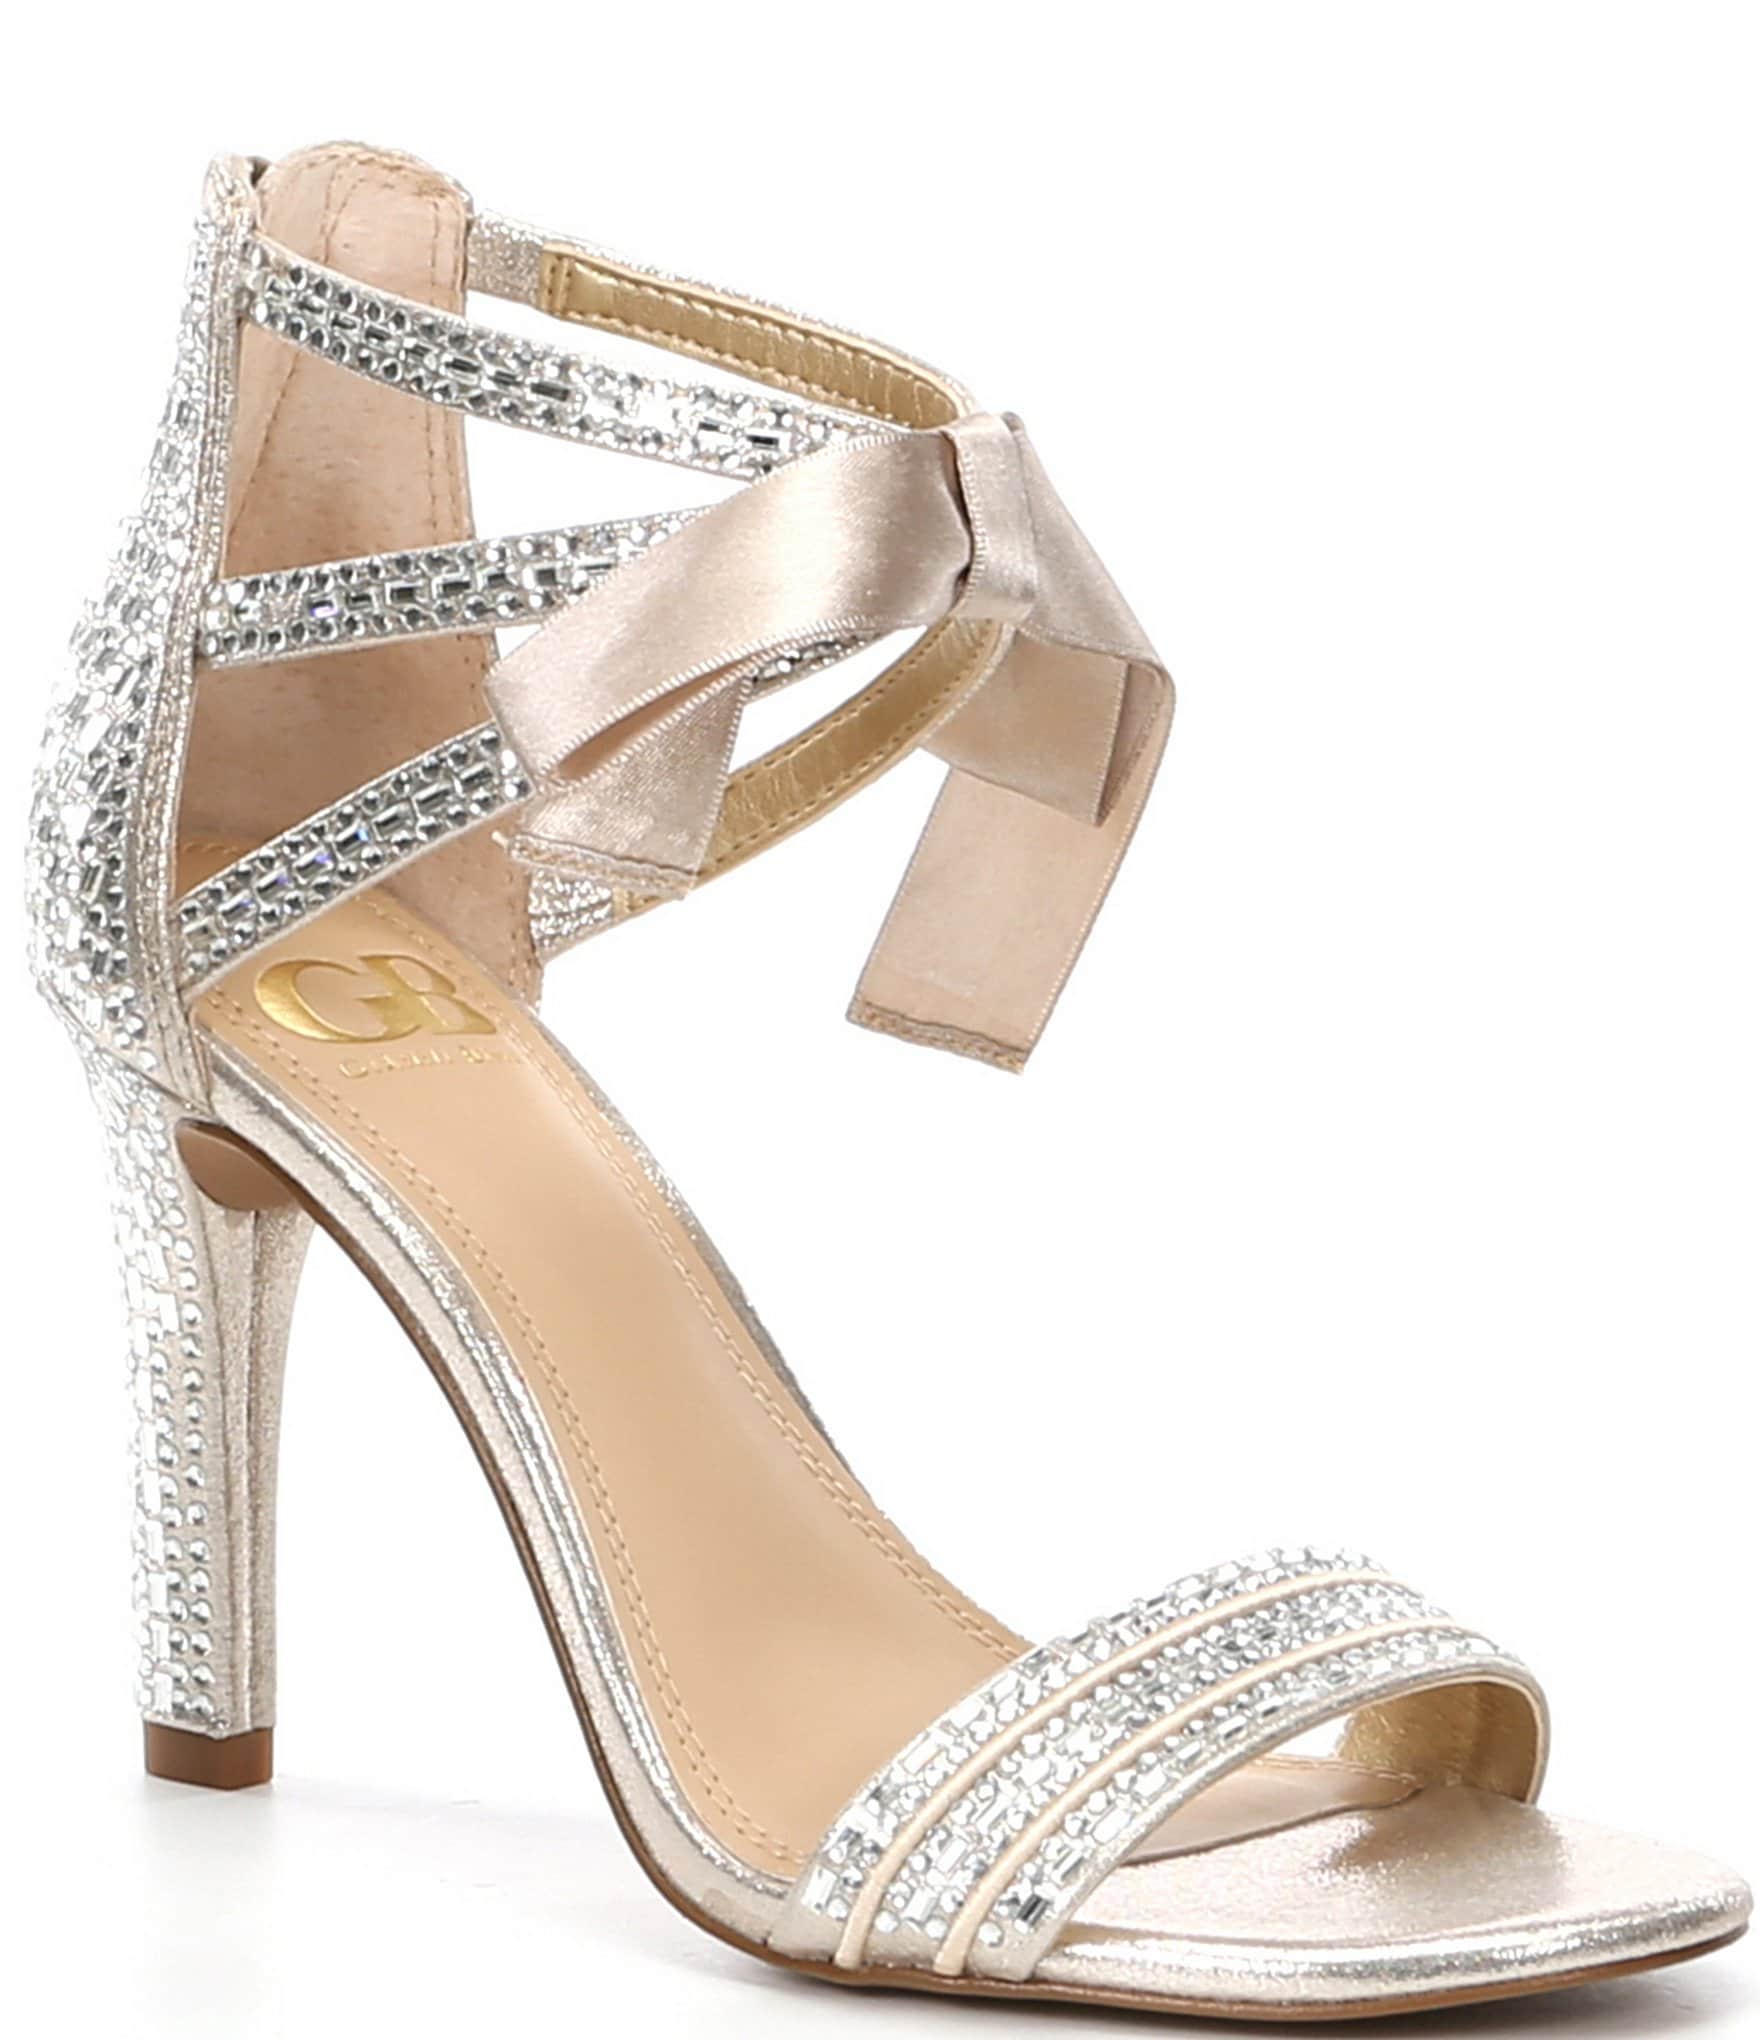 Carley Rose Gold High Heel Bow Prom Evening Shoes